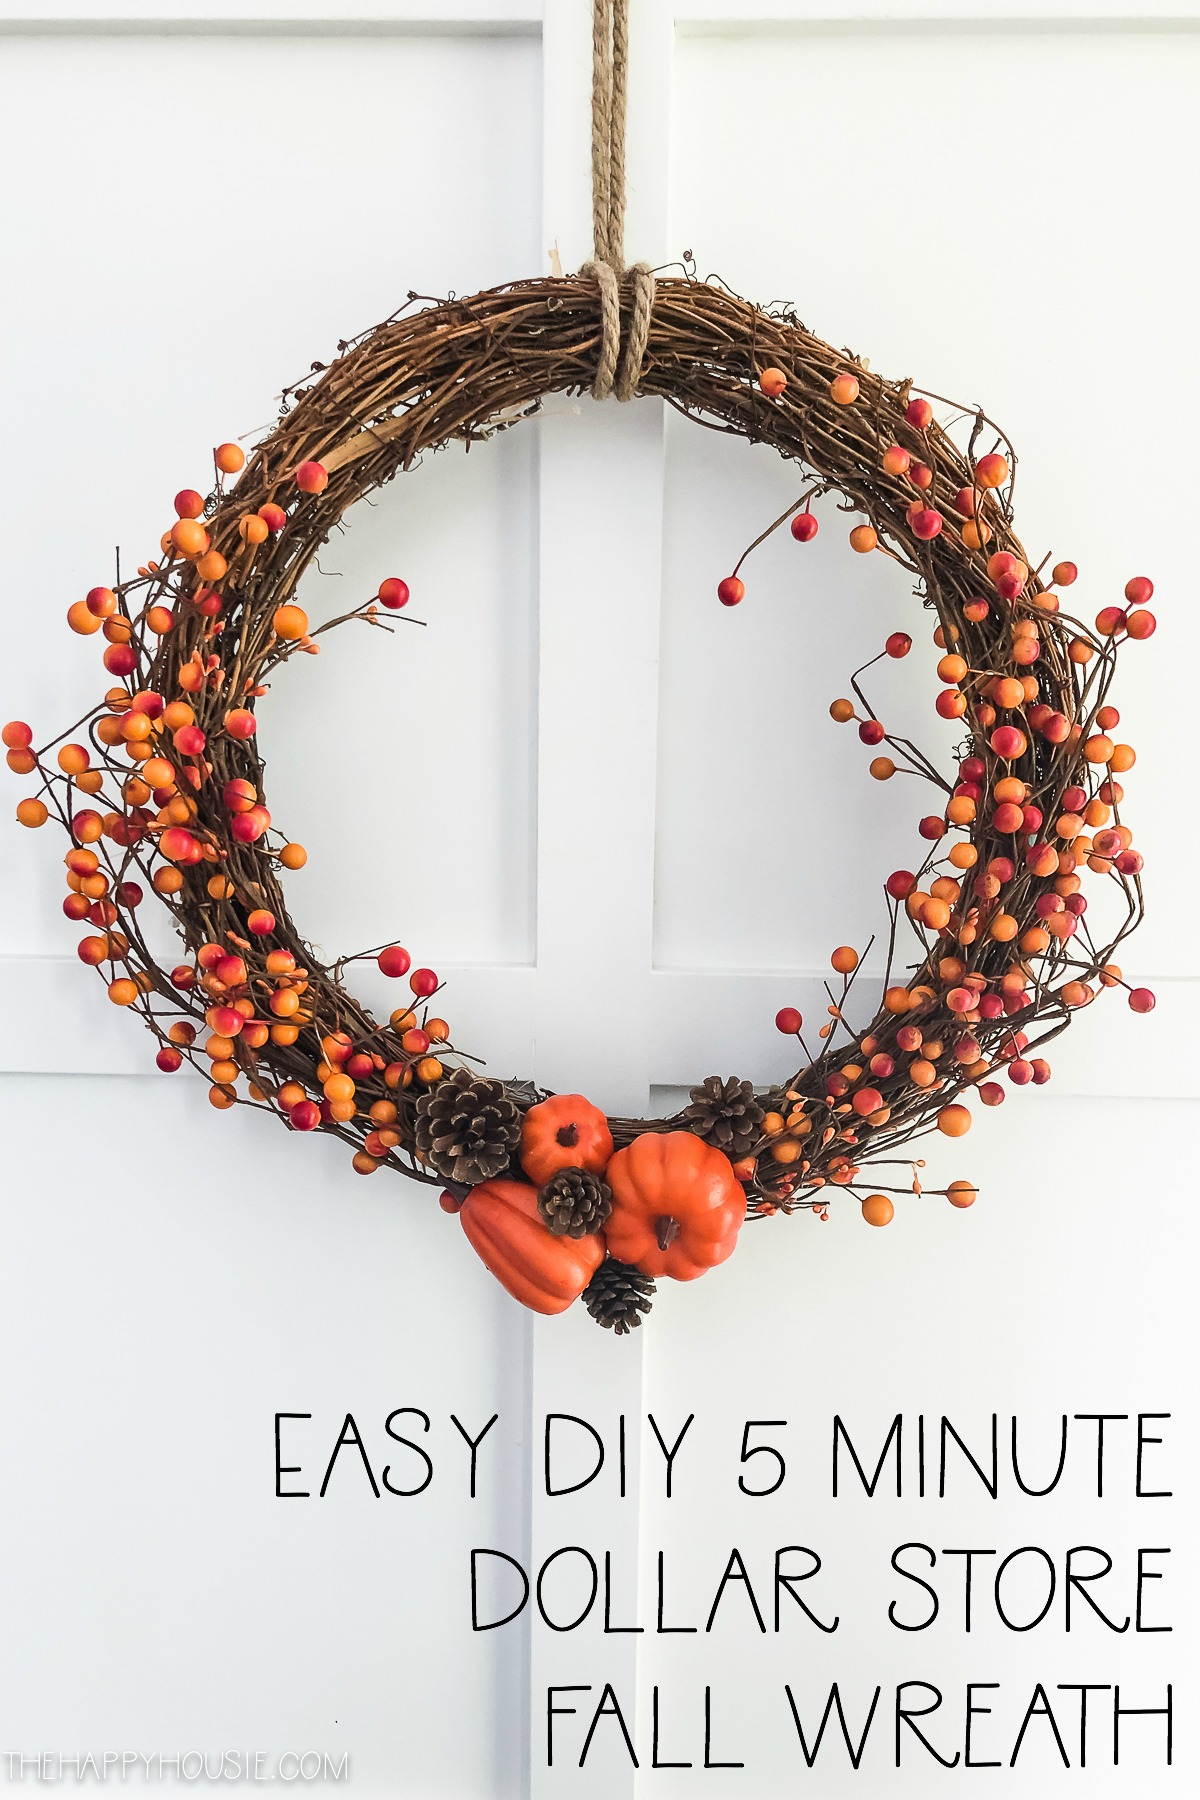 Easy DIY 5 Minute Dollar Store Fall Wreath graphic.